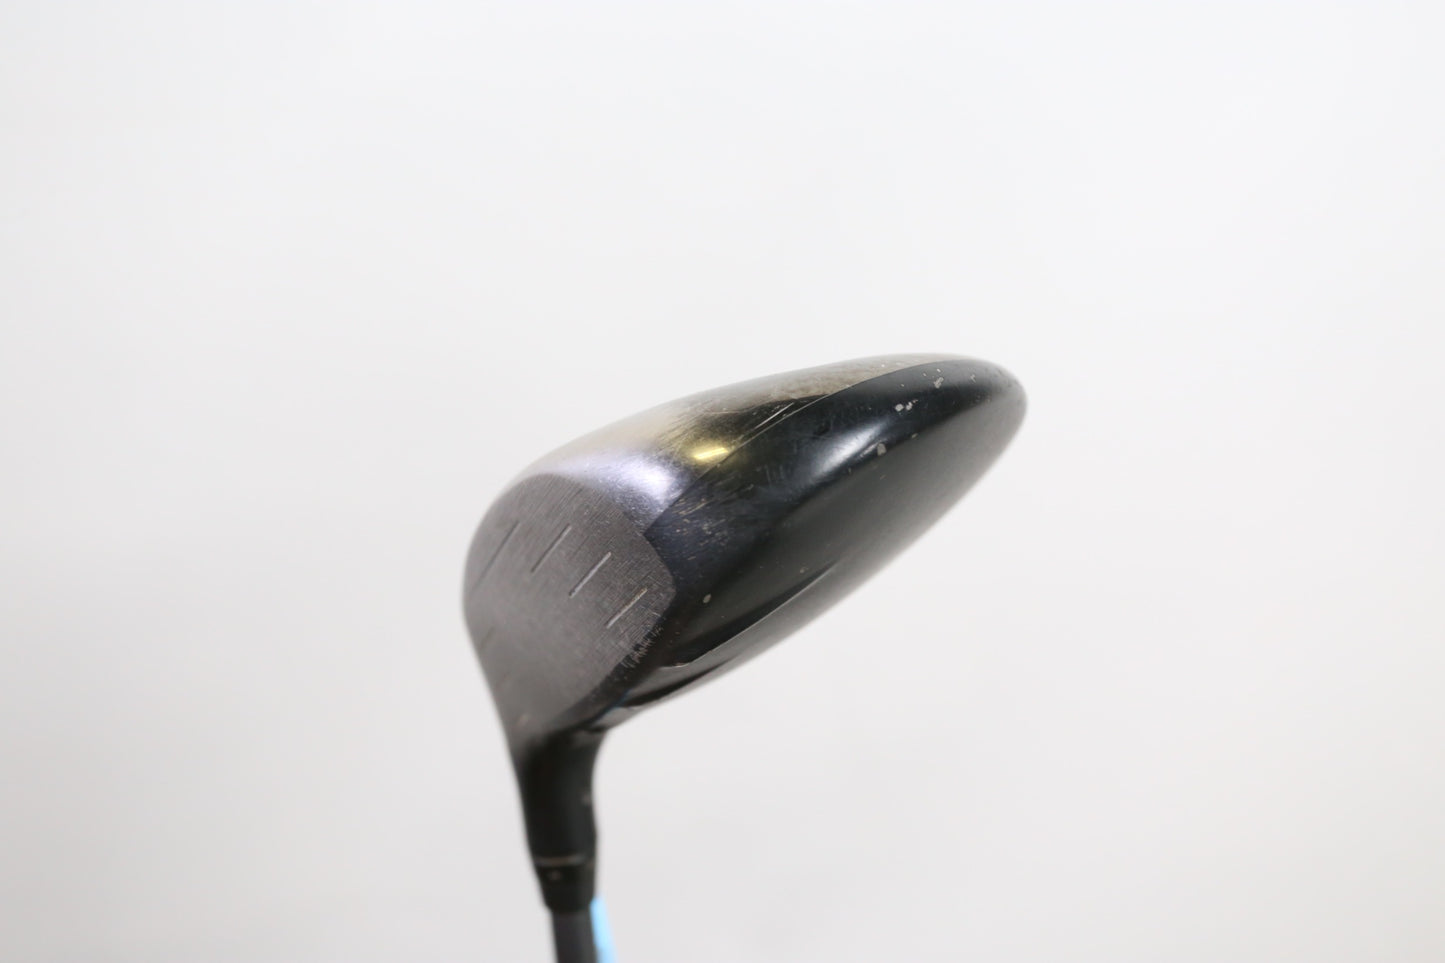 Used Ping G 3-Wood - Right-Handed - 14.5 Degrees - Stiff Flex